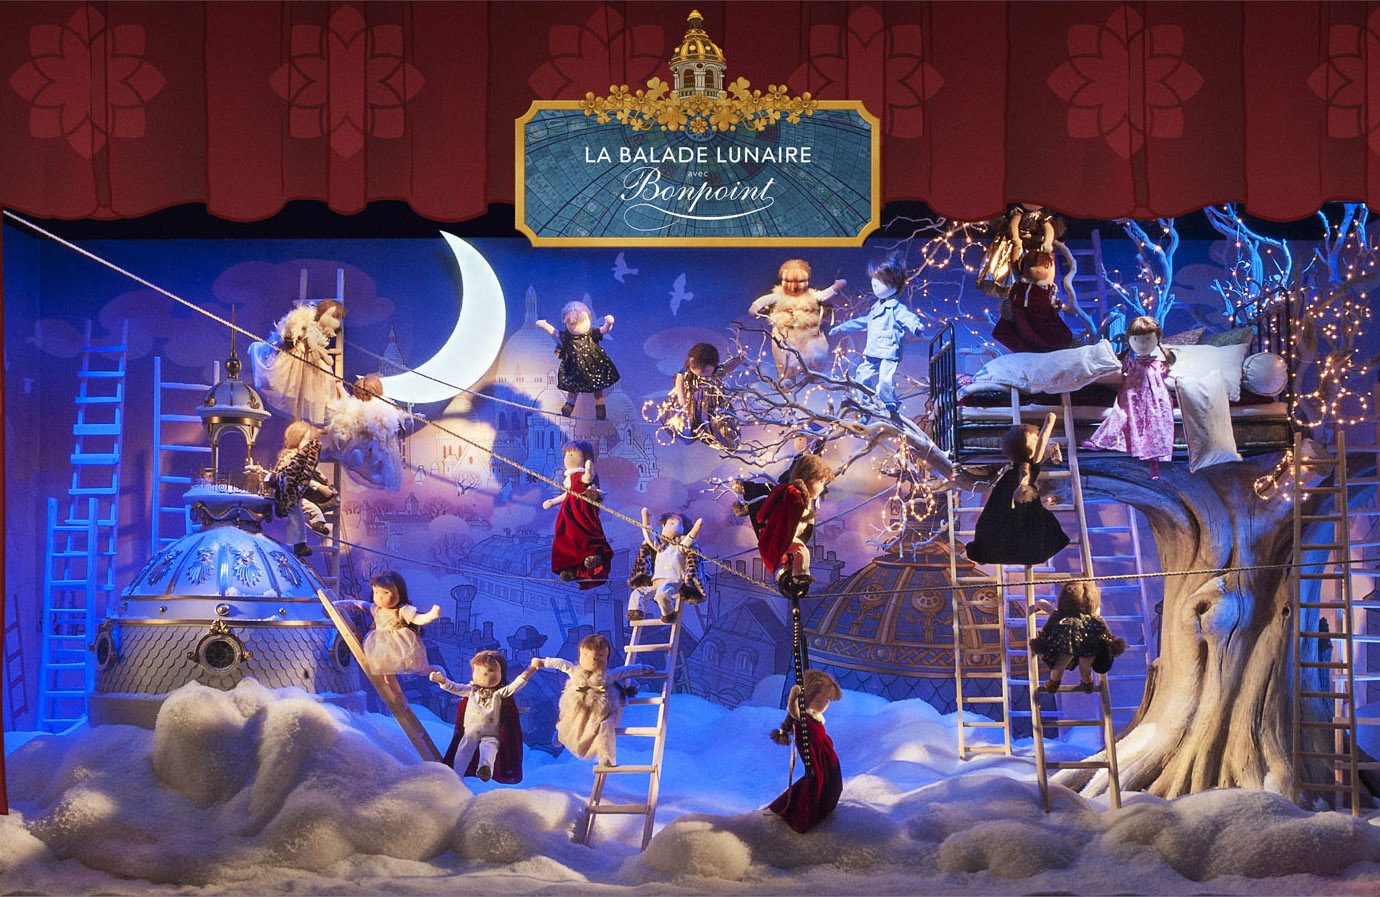 Trip Ideas stage musical theatre display window Christmas christmas decoration